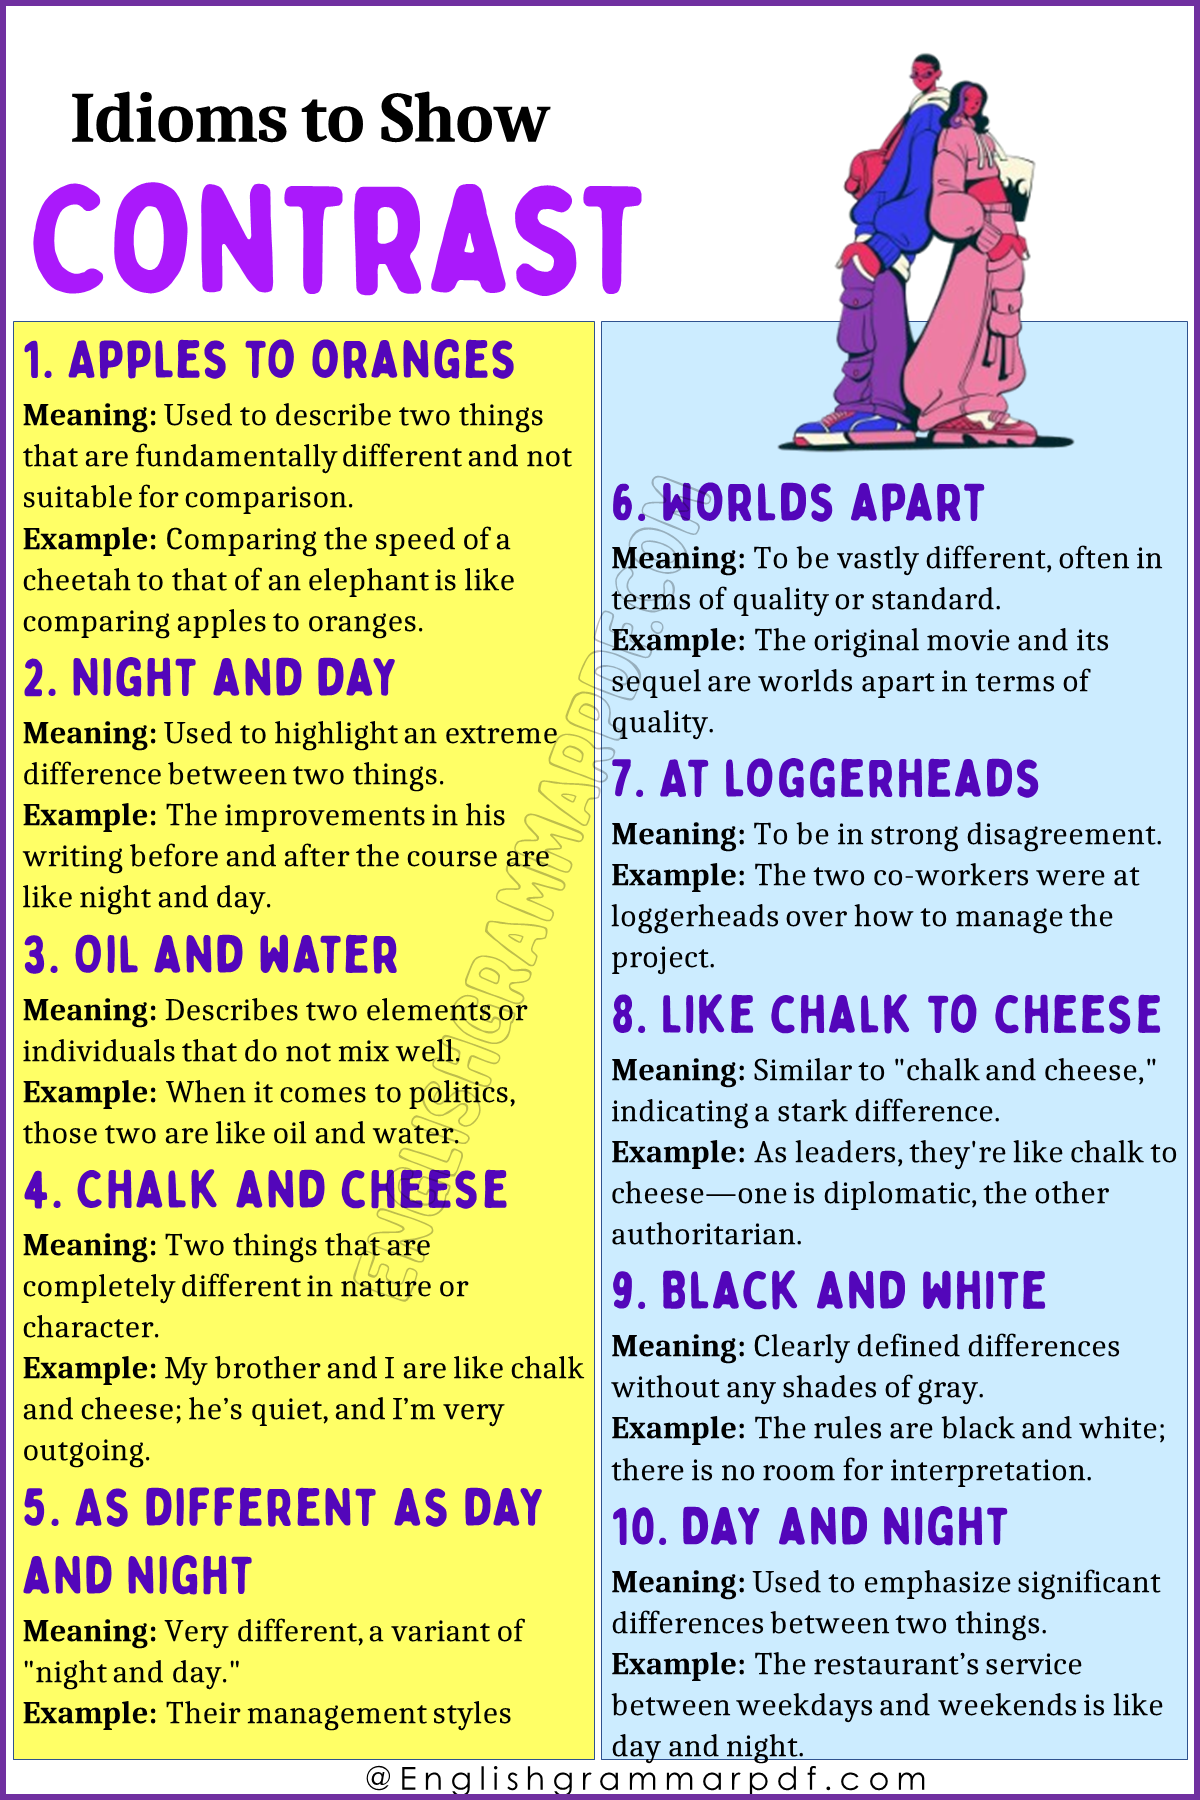 Idioms and Expressions to Show Contrast